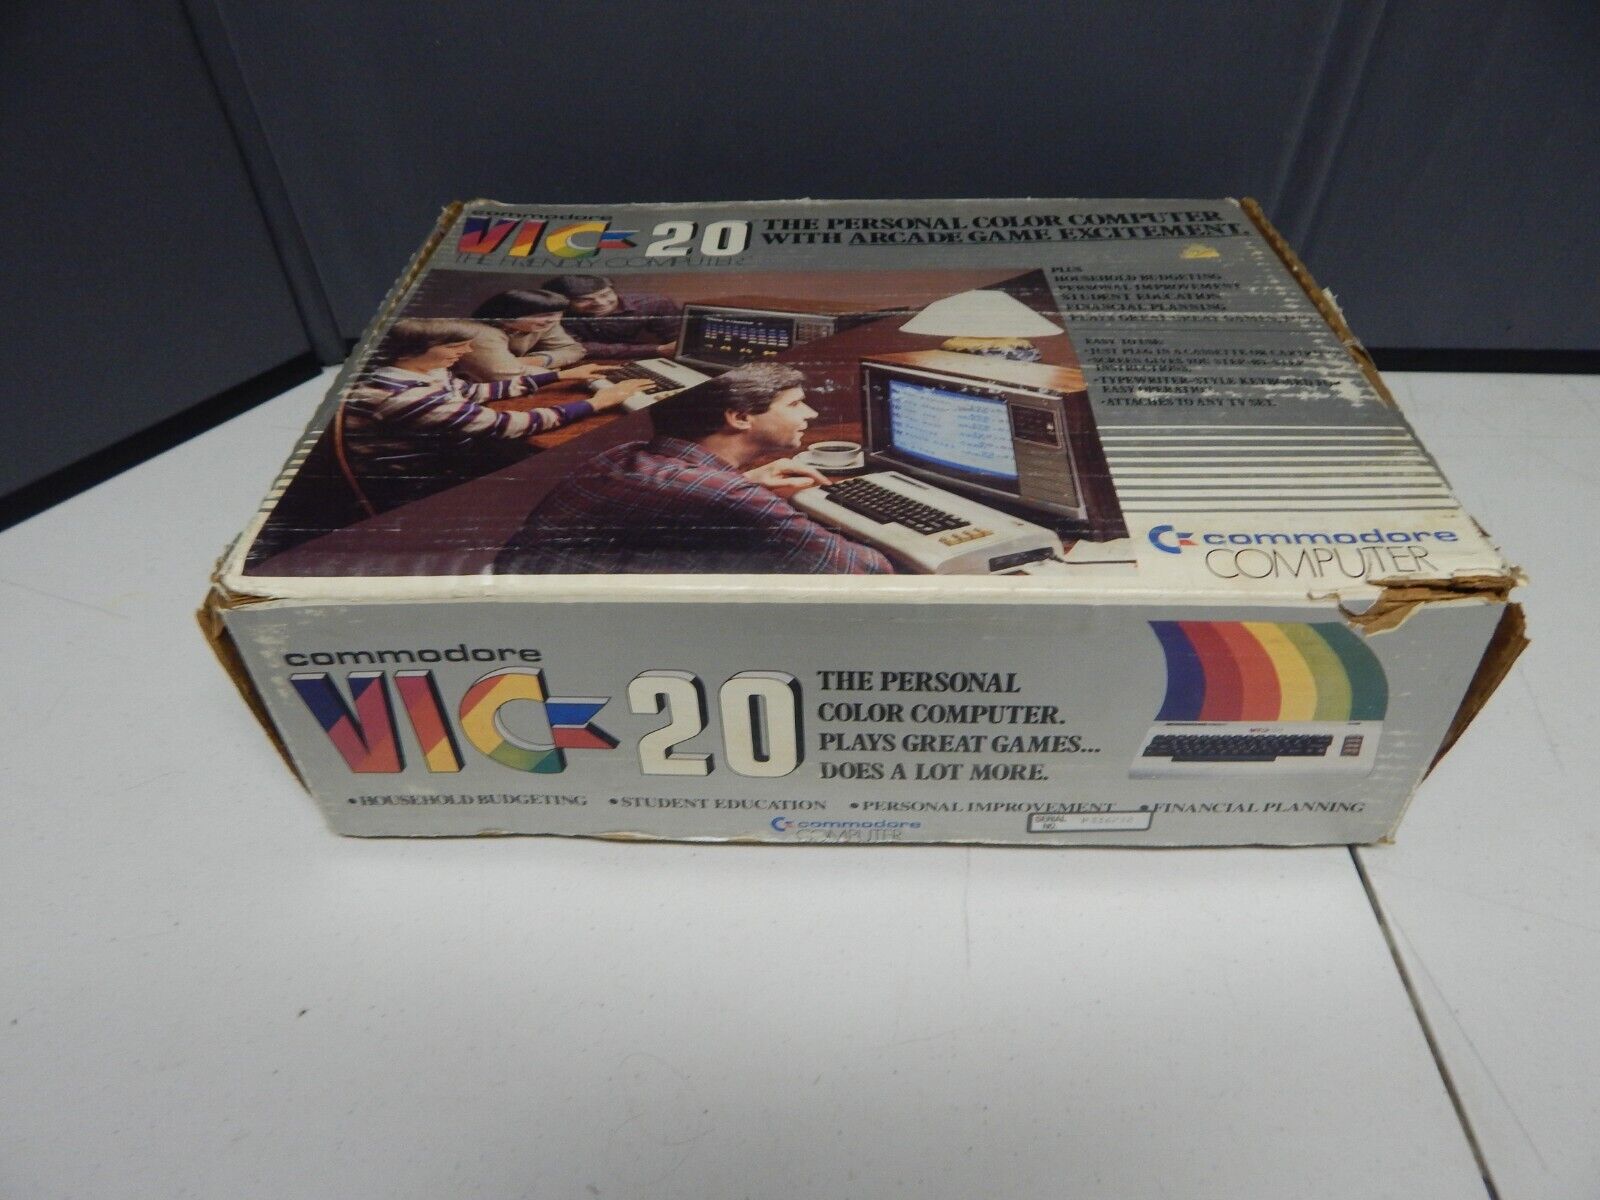 Commodore Vic 20 personal computer + box + power cords VINTAGE...FULL FUNCTION